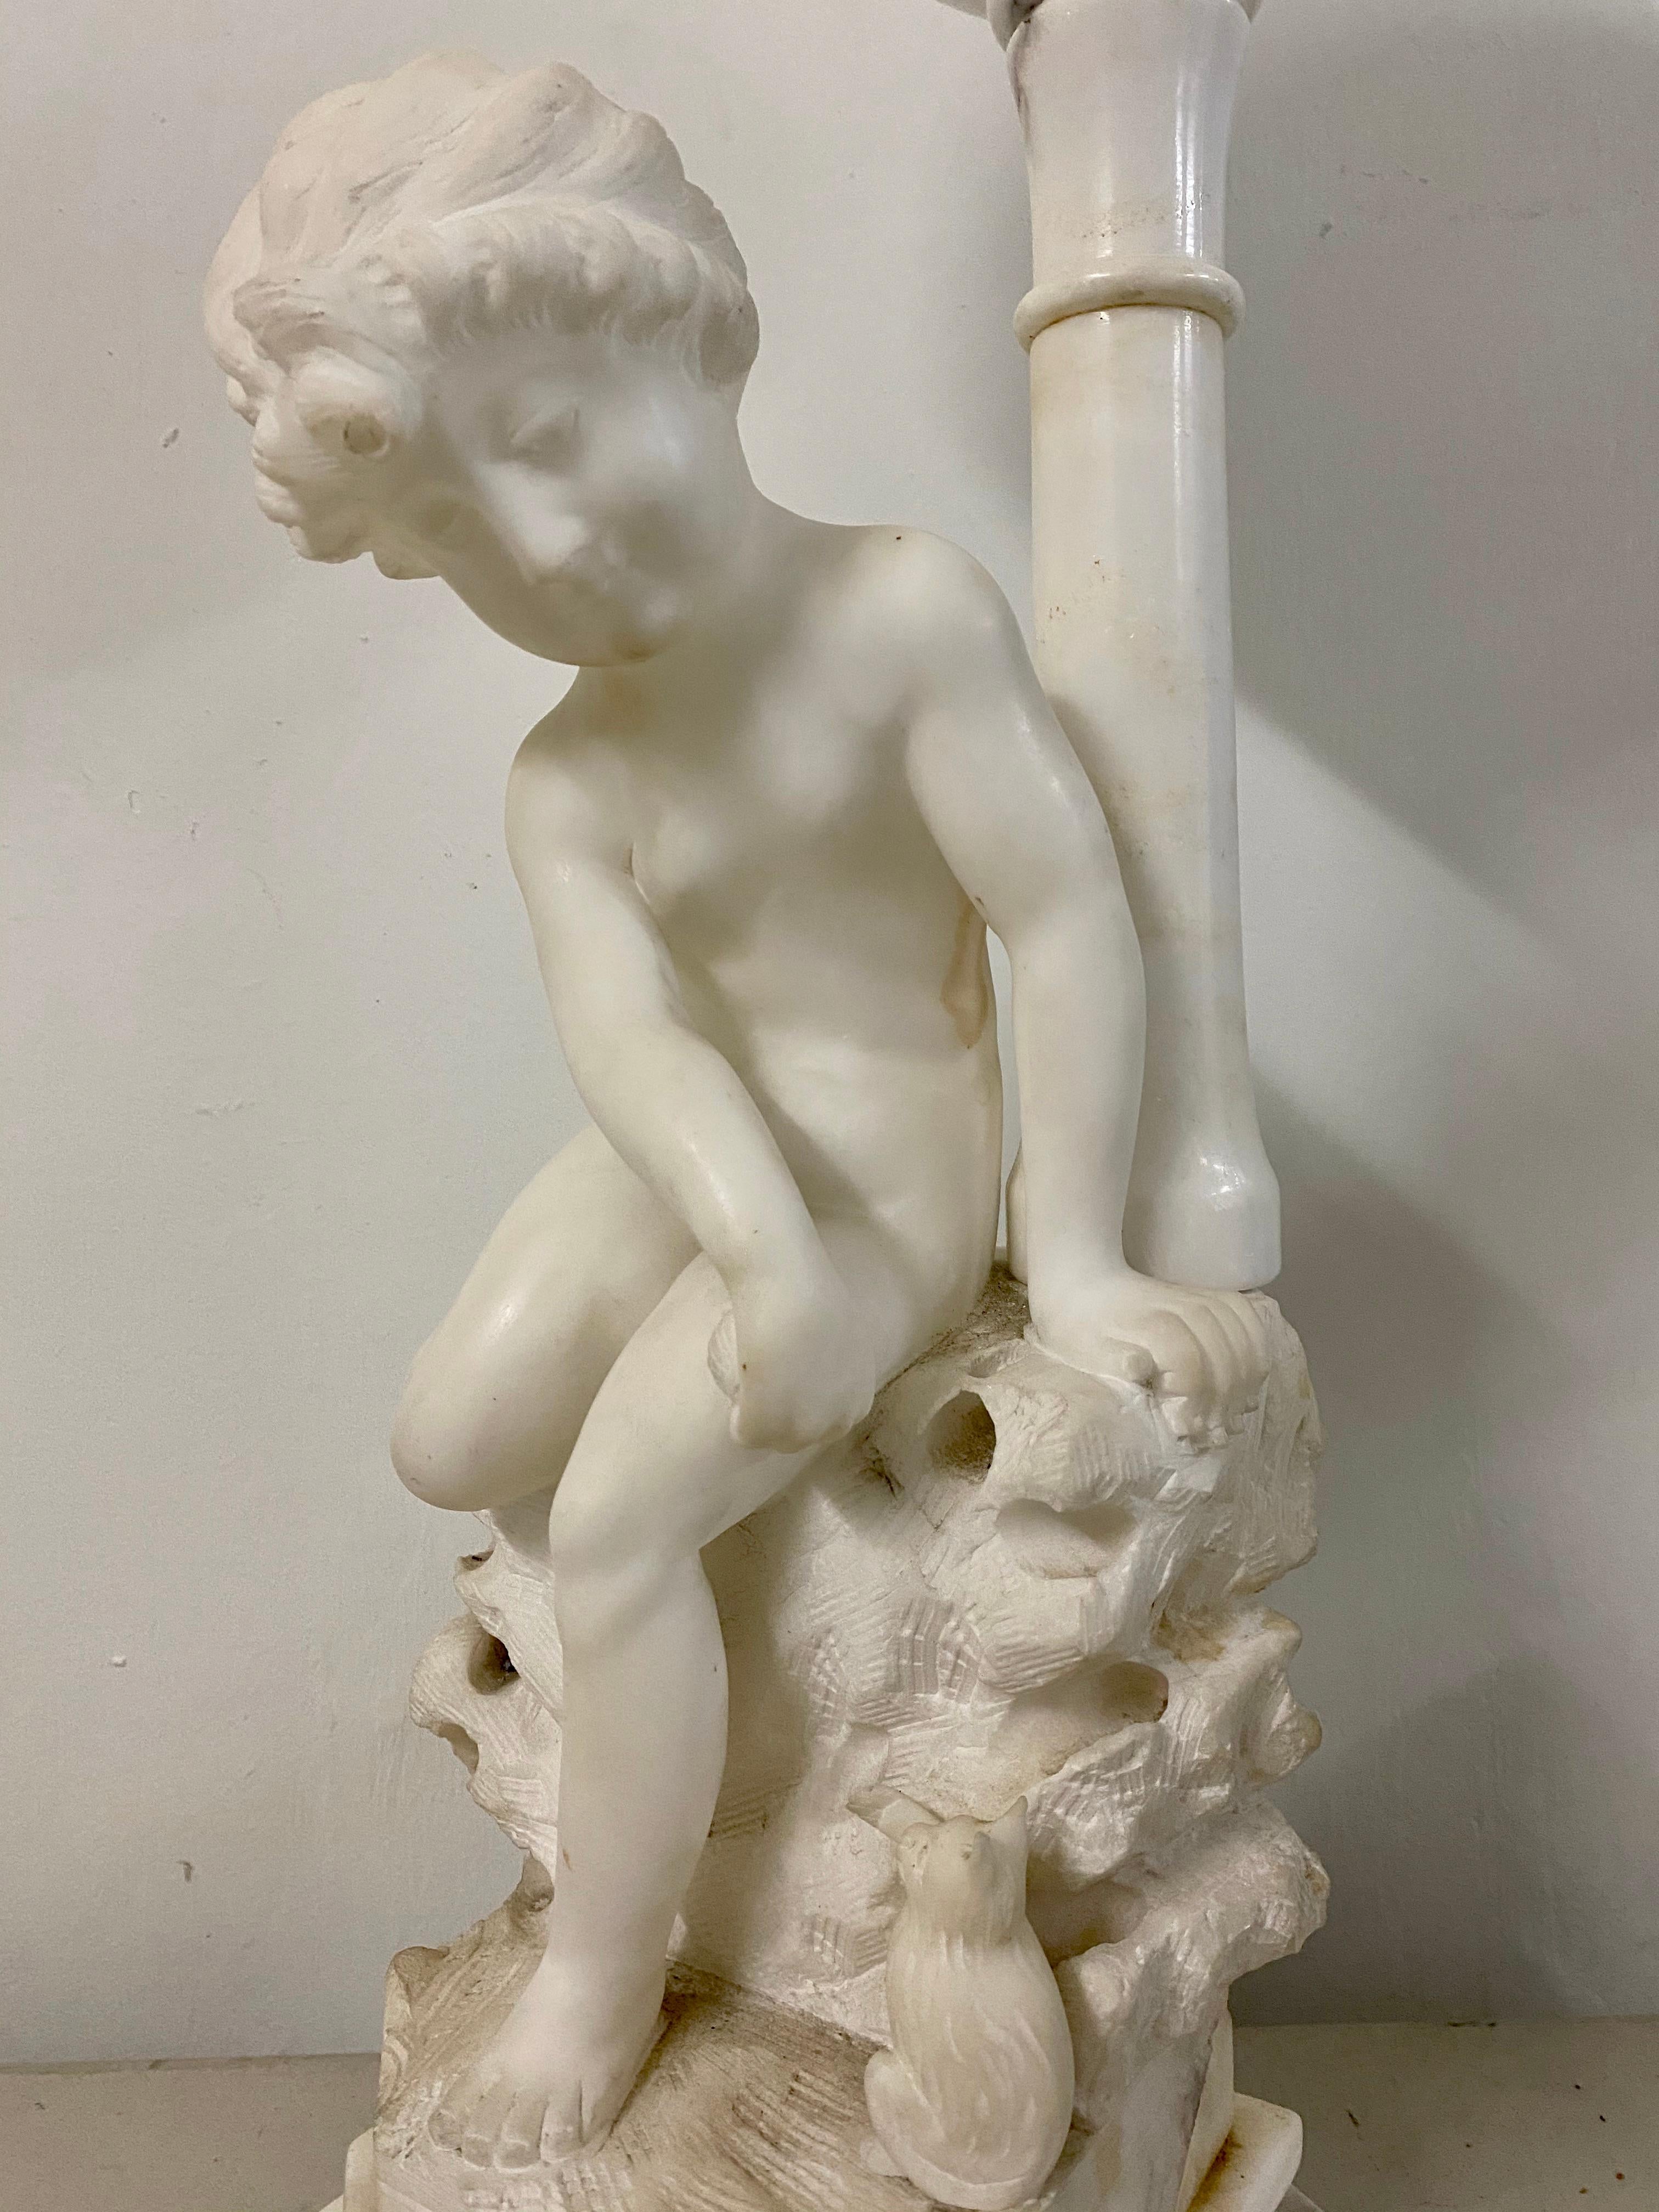 19th century Alabaster lamp young girl with kitten

Wonderful alabaster lamp with shade

Measures: 10